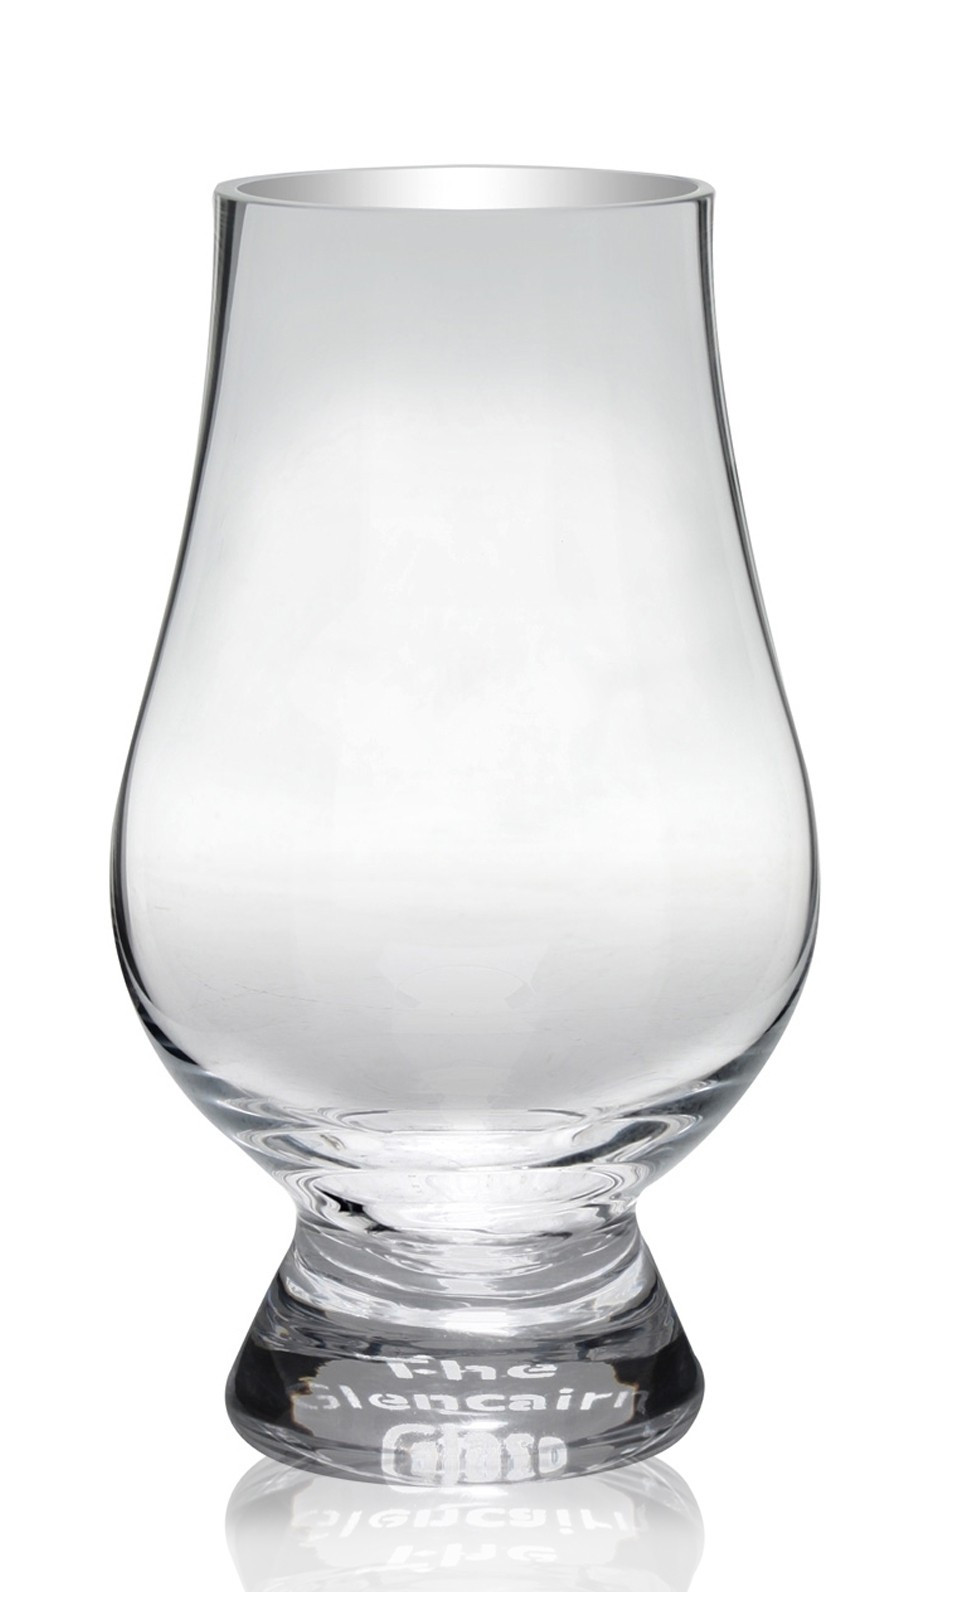 15 Fabulous St Louis Crystal Vase 2024 free download st louis crystal vase of wine accessories in crystal whisky glass